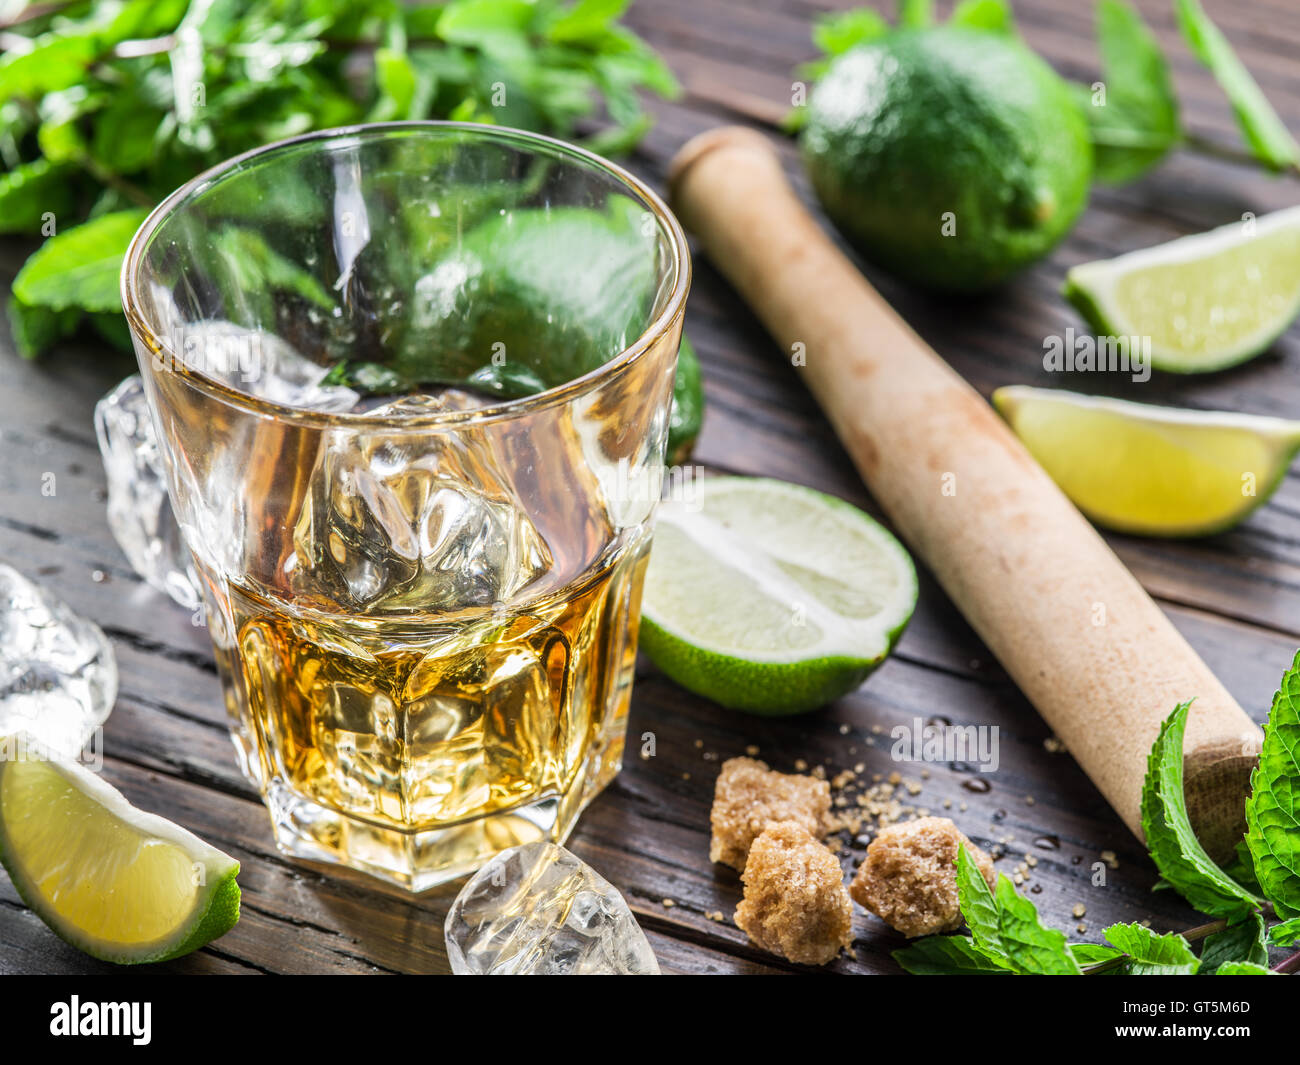 Mojito cocktail ingredients on the wooden table. Stock Photo